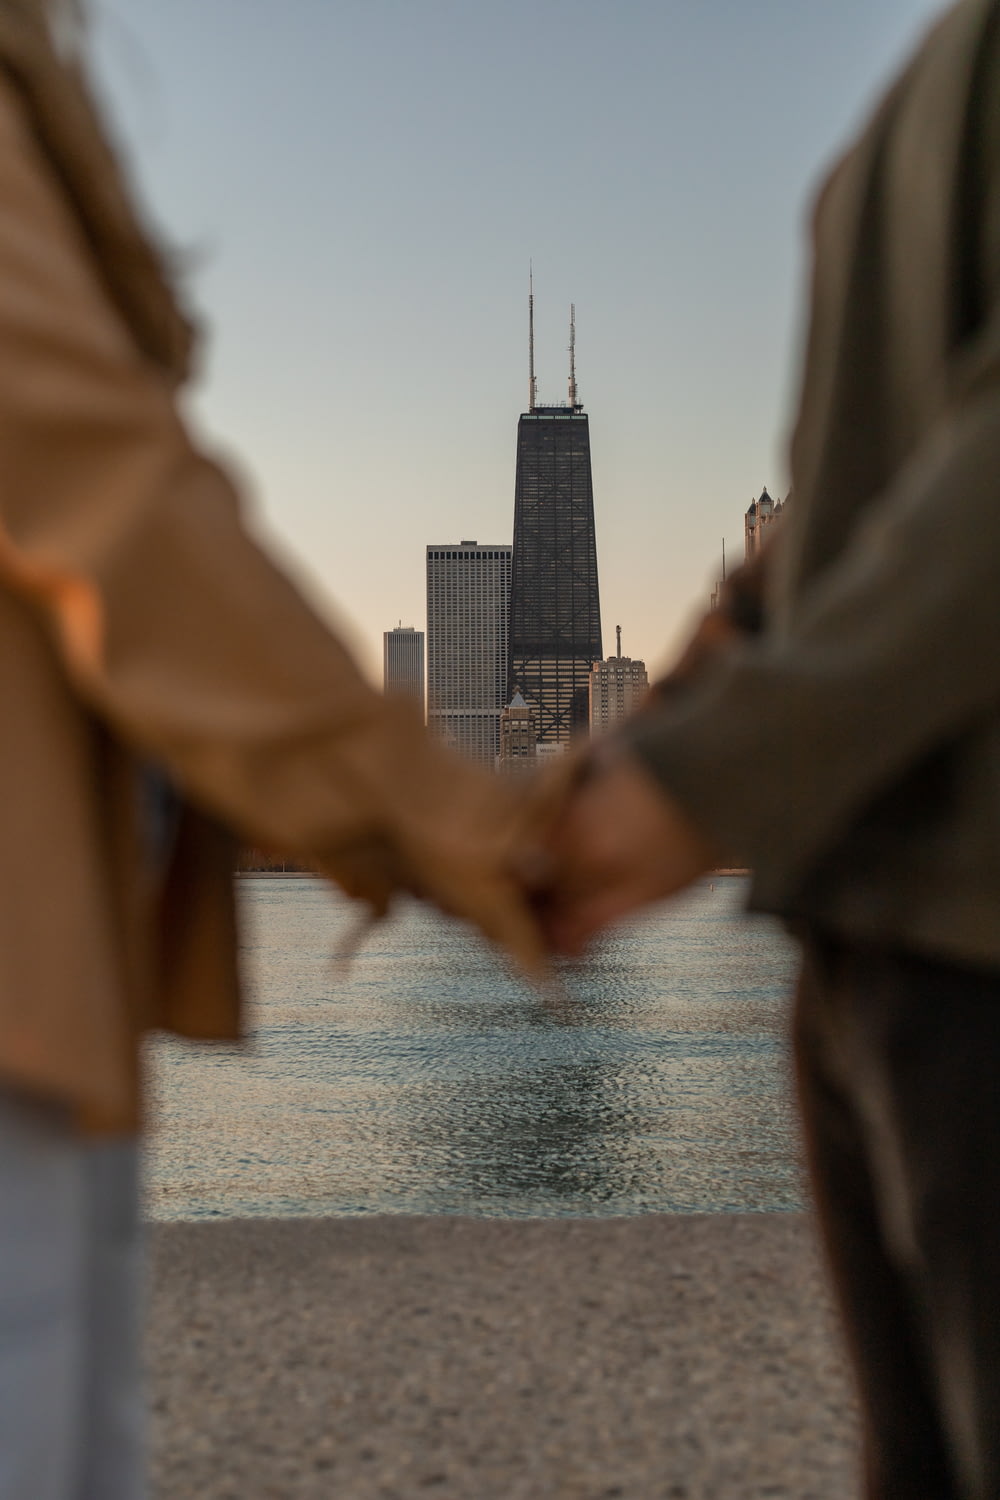 a person holding their hand up to a body of water with a tall building in the background